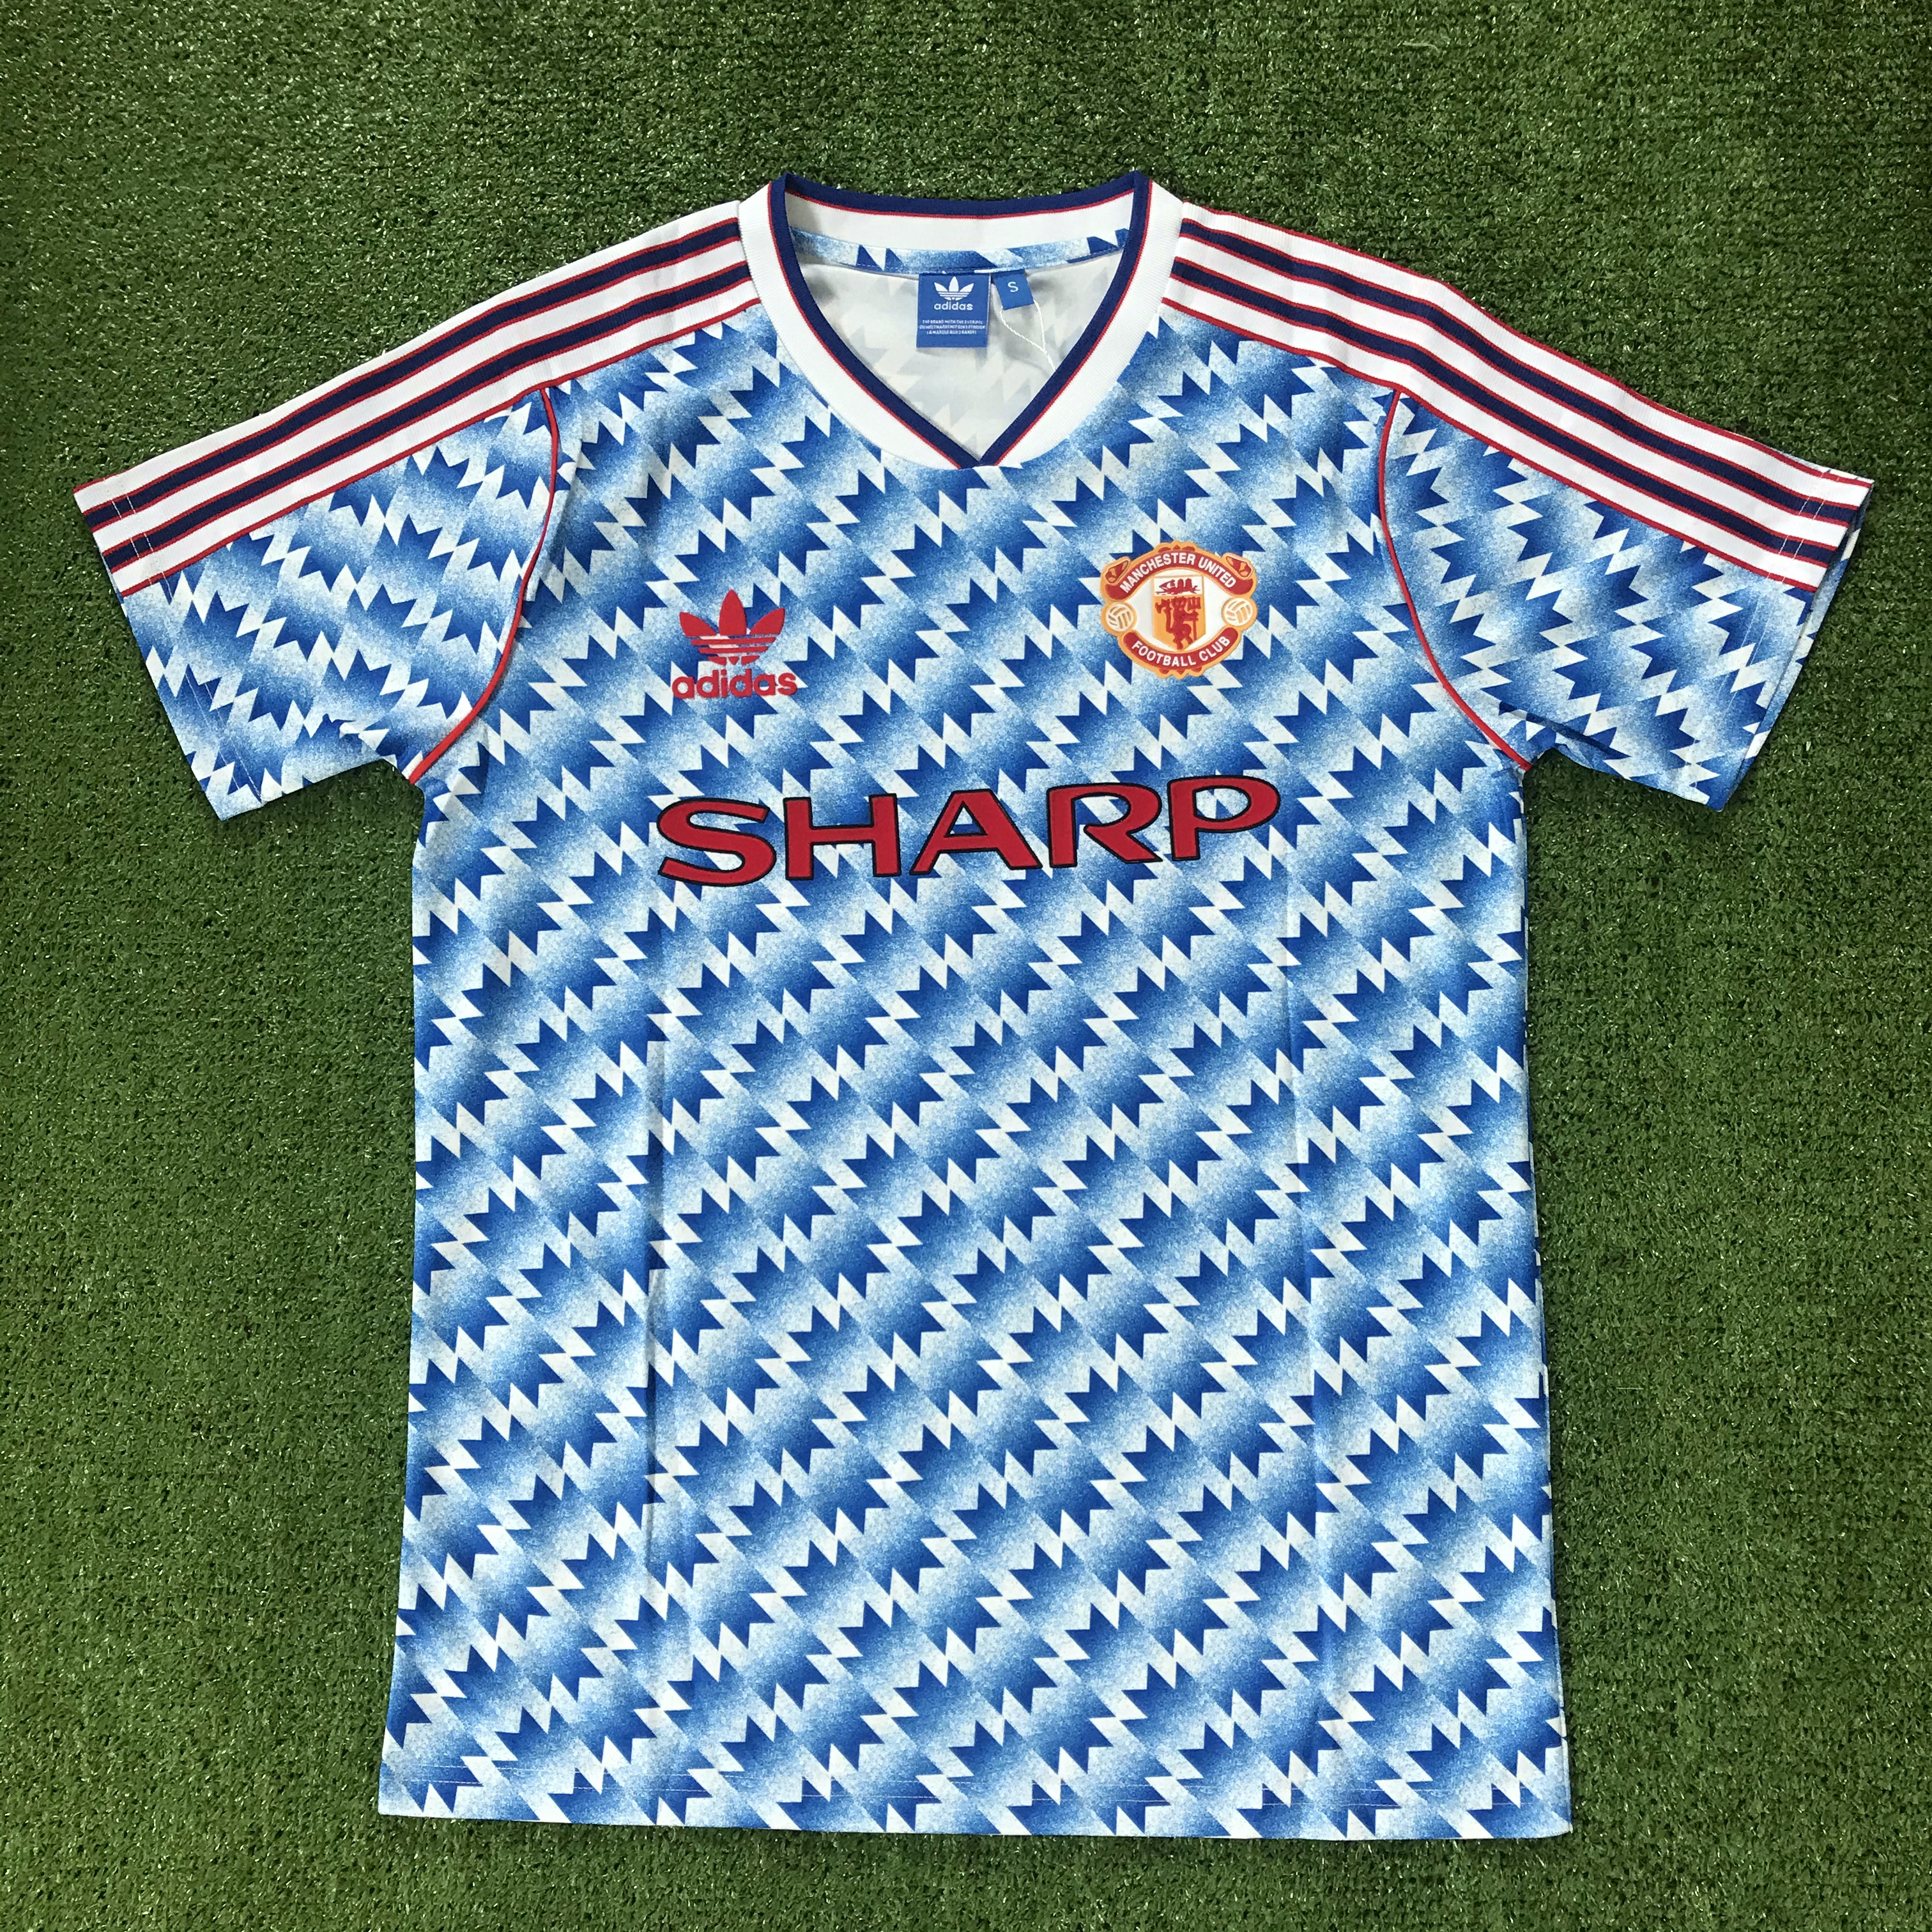 Manchester United away shirt 1990-1992 in XL